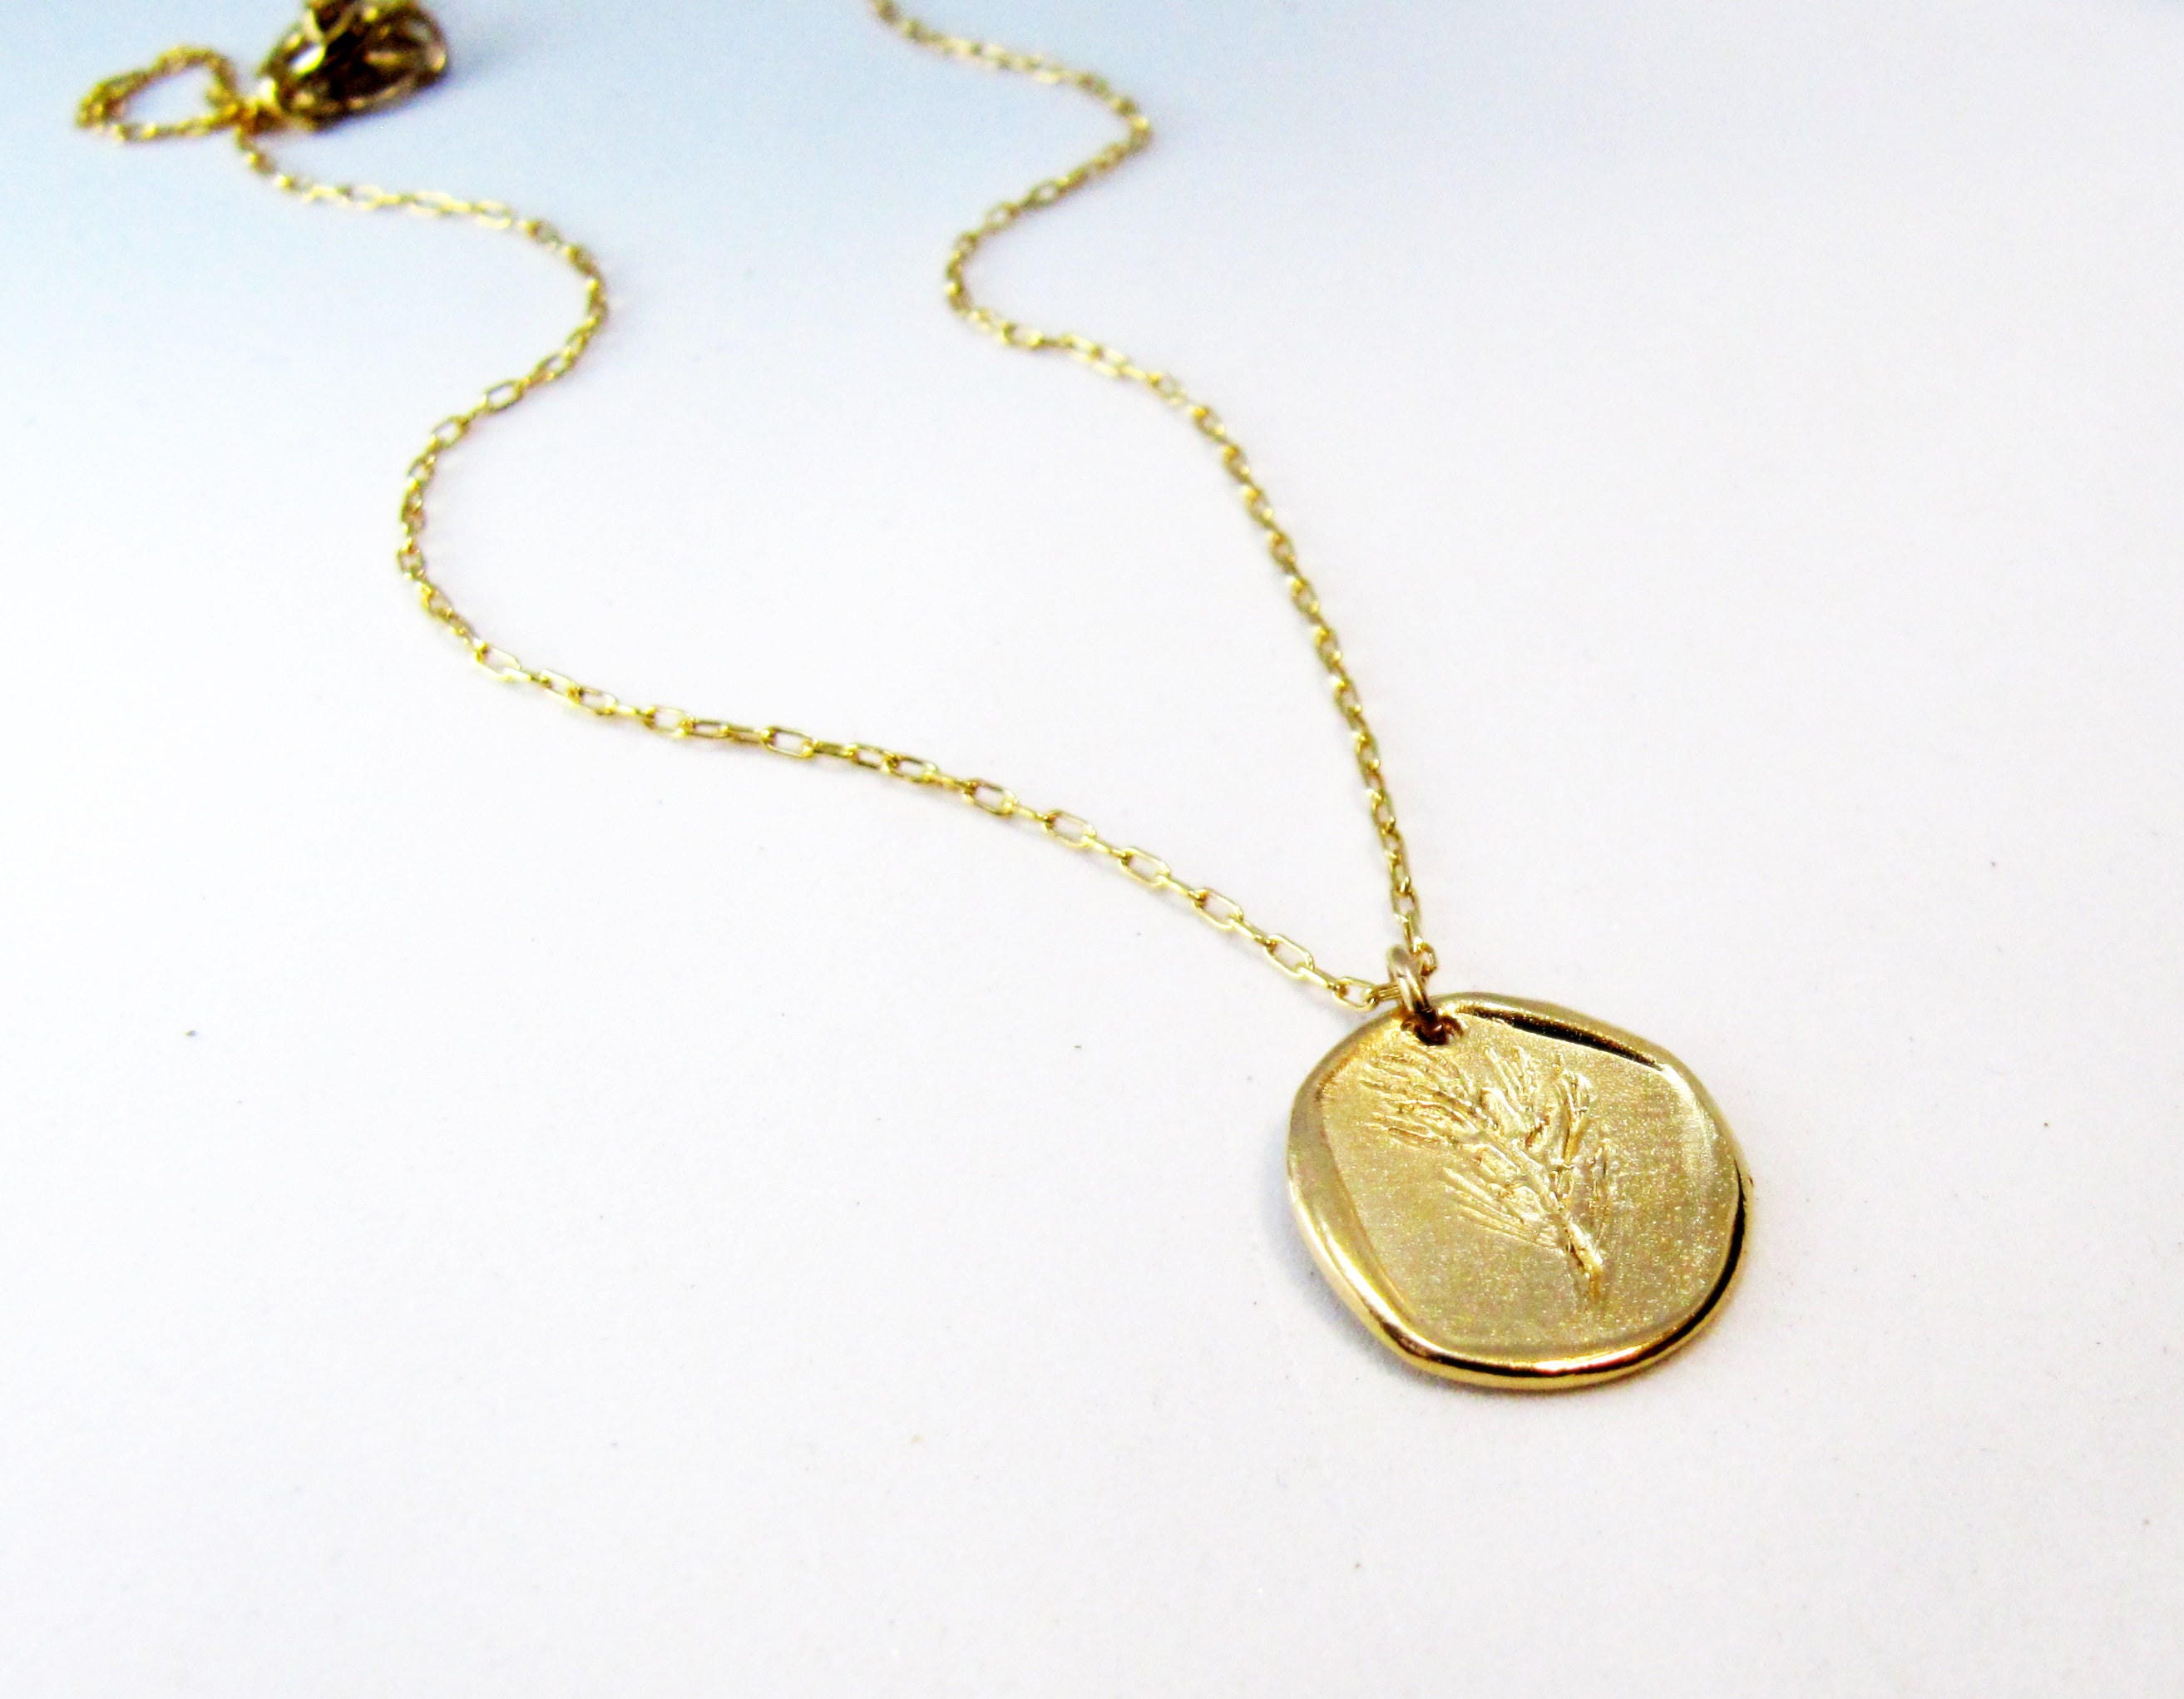 Coin necklace Gold necklace Dainty gold necklace Simple | Etsy